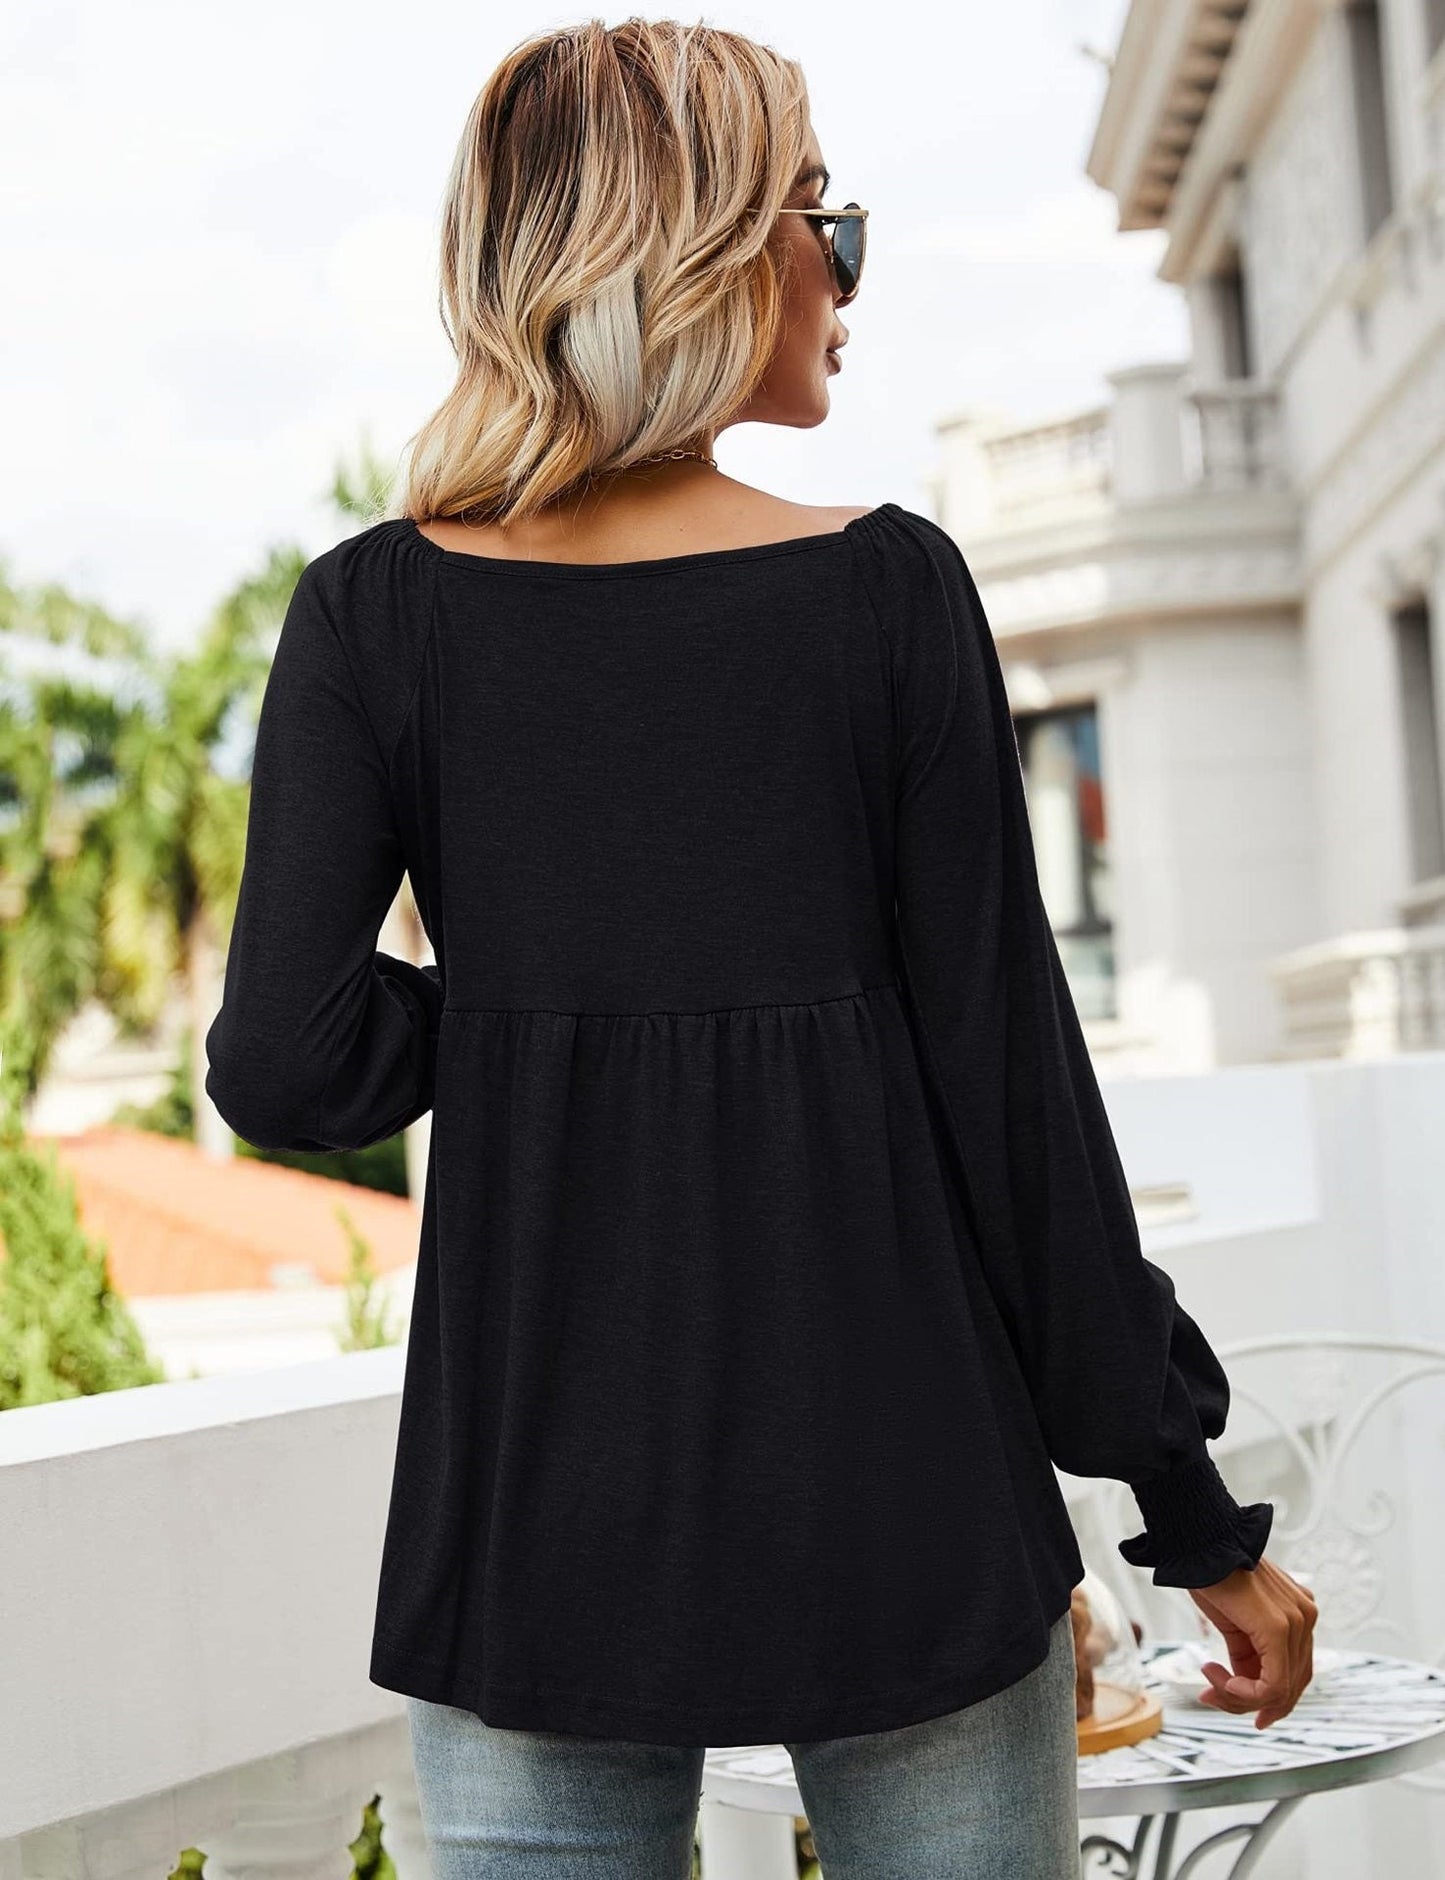 Casual Fall Long Sleeves T Shirts for Women